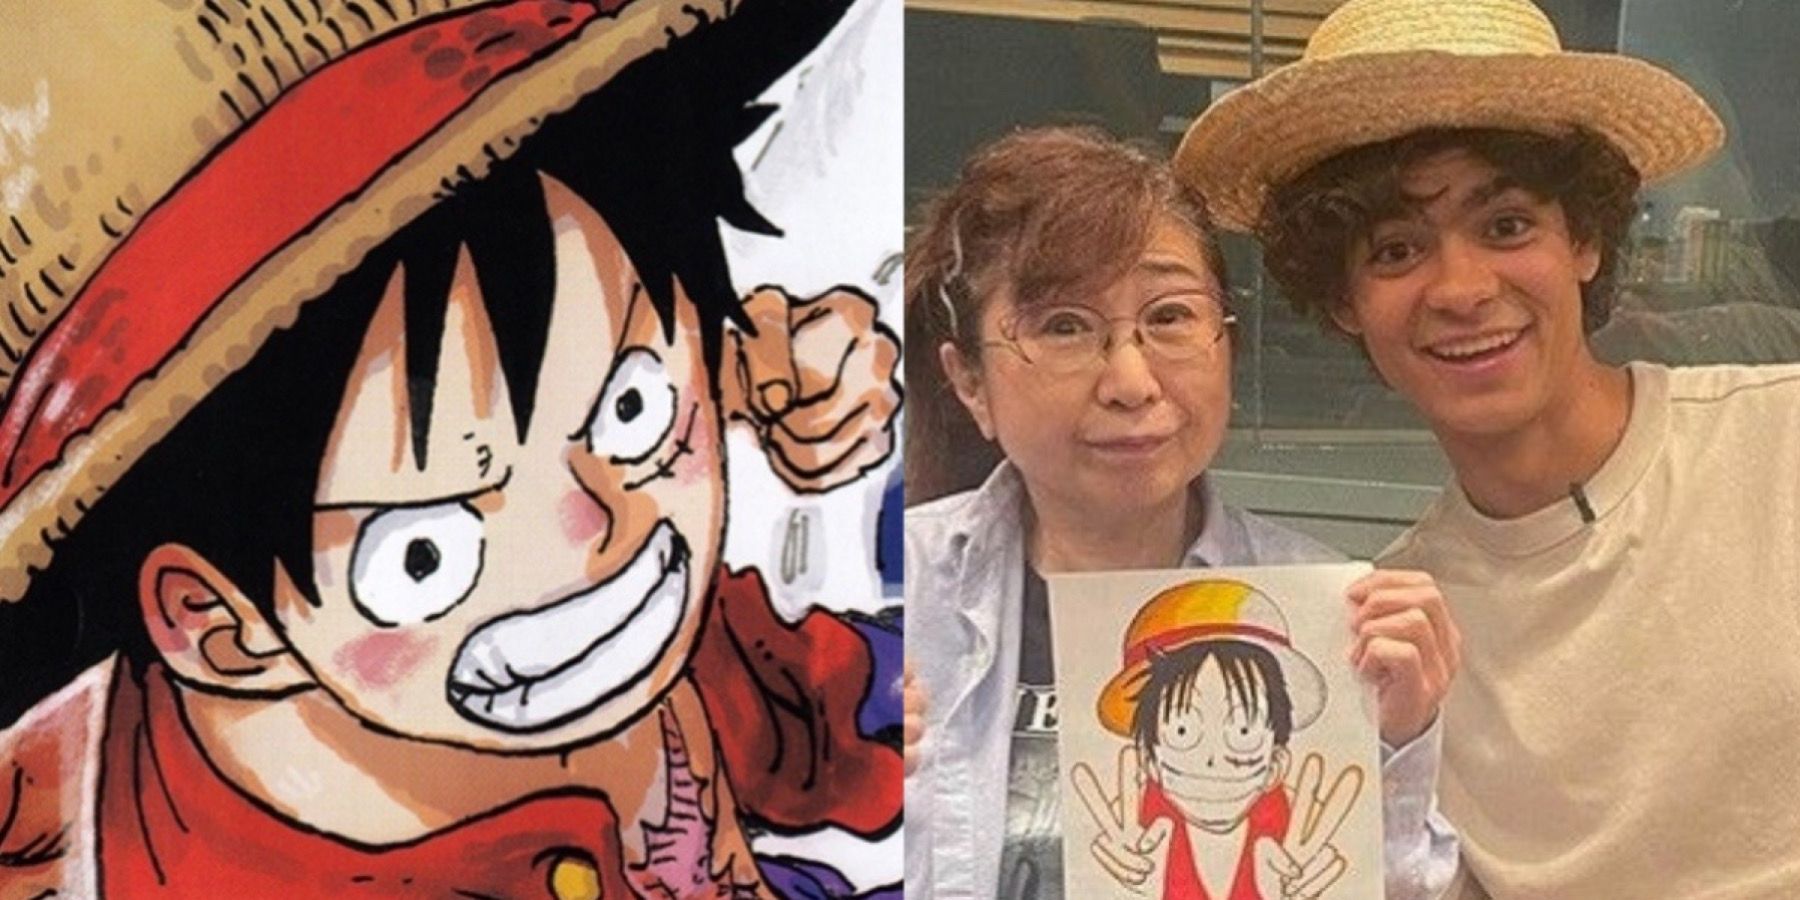 Netflix Drops Photos Of 'One Piece' Cast: Luffy & The Straw Hats